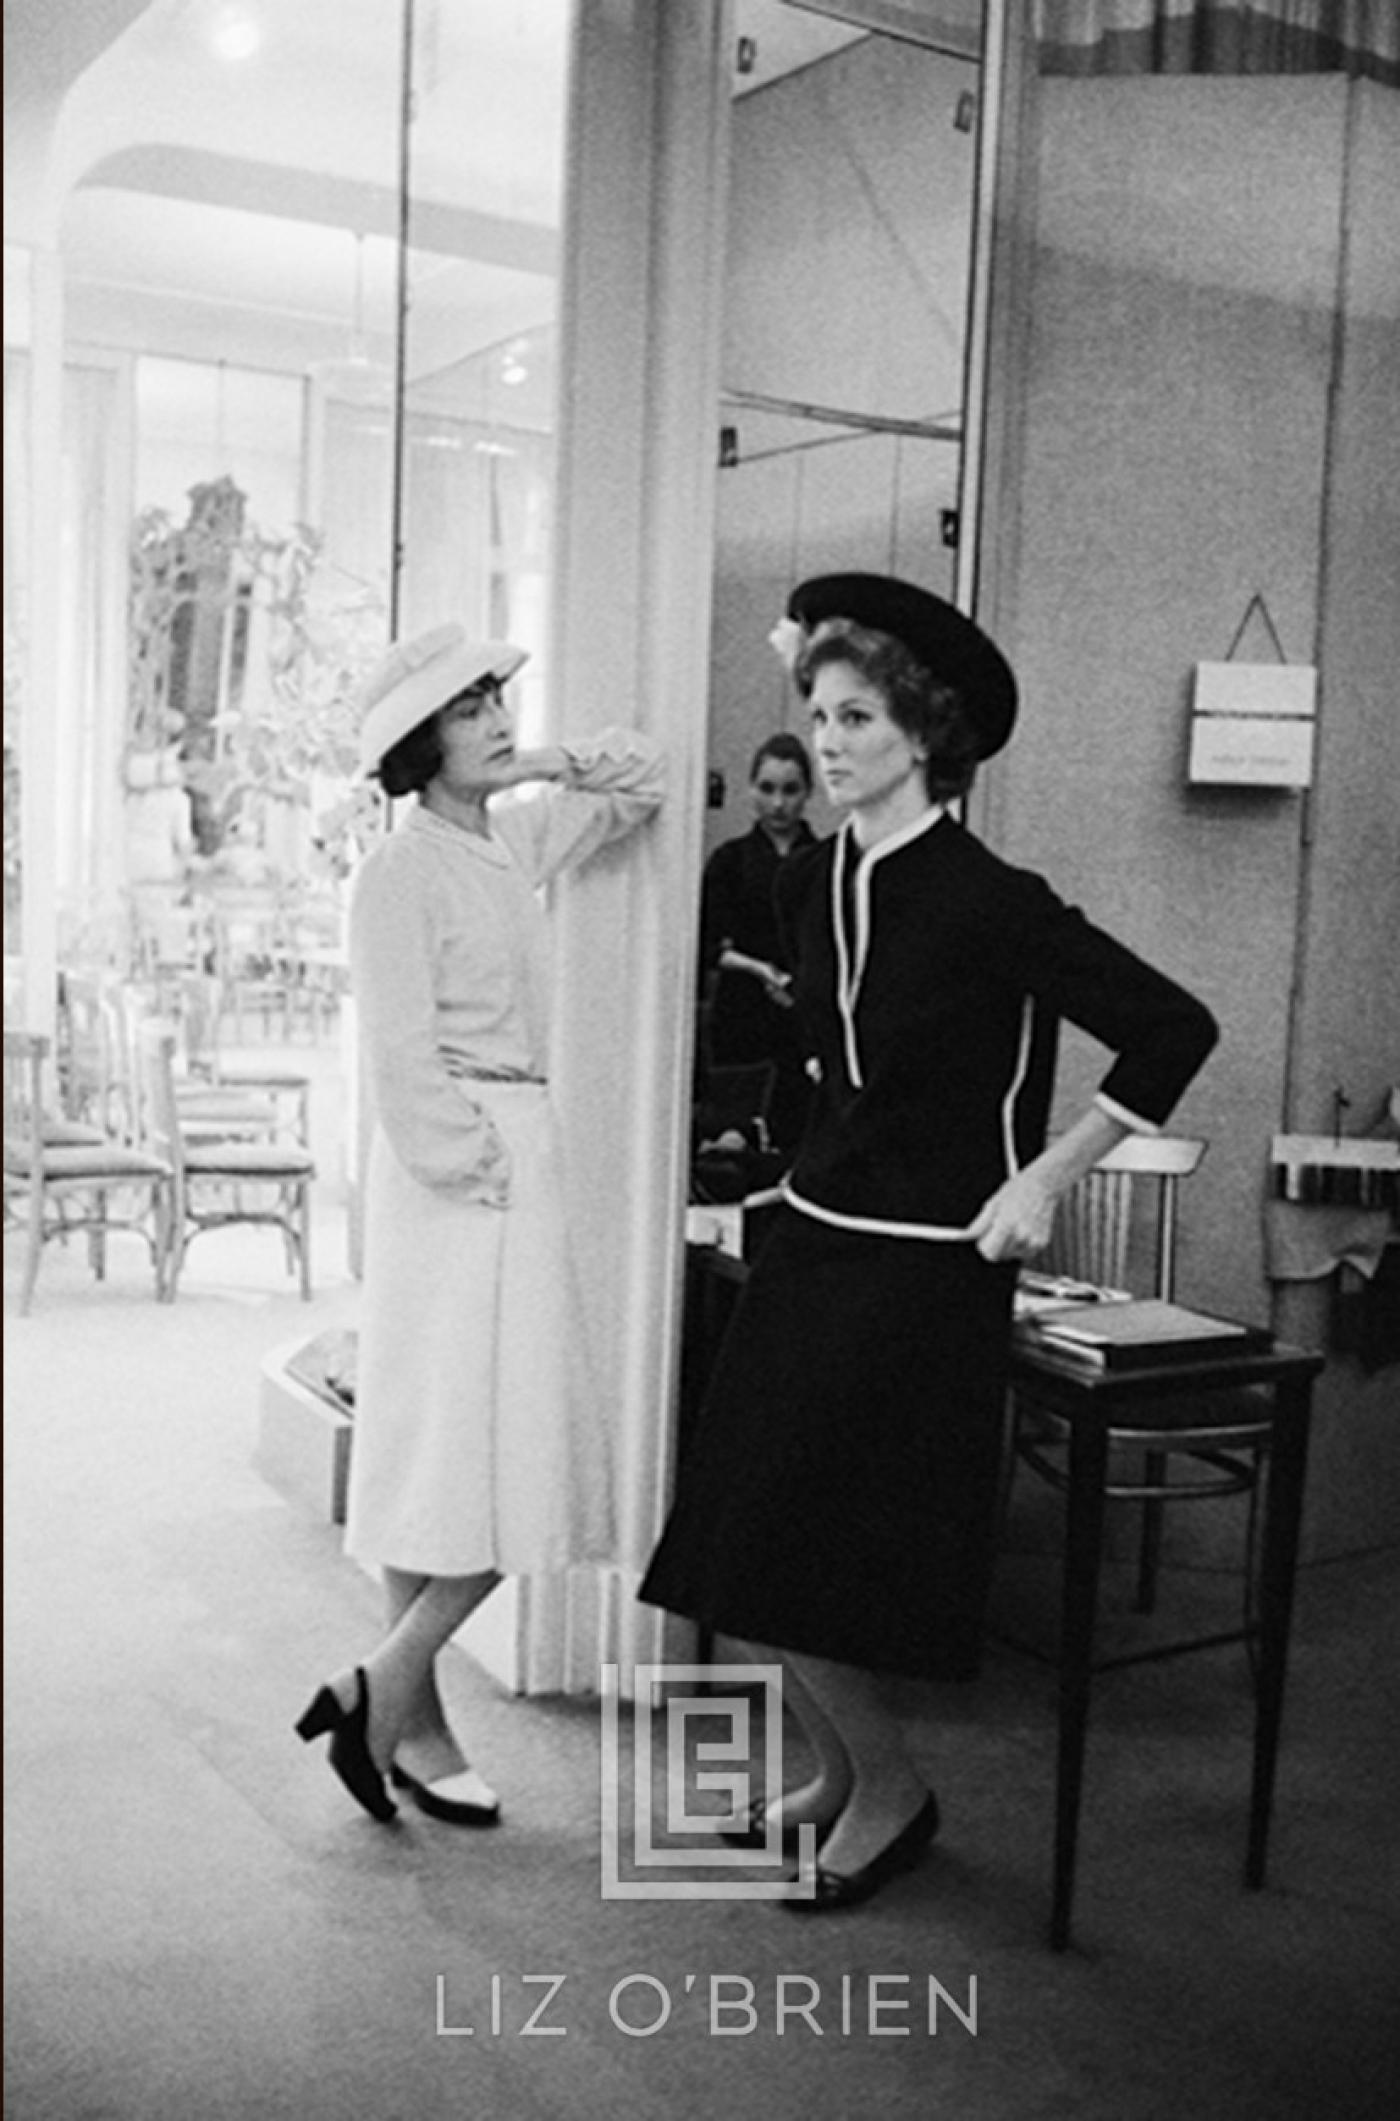 Mark Shaw - Coco Chanel with Suzy Parker in Dark Suit